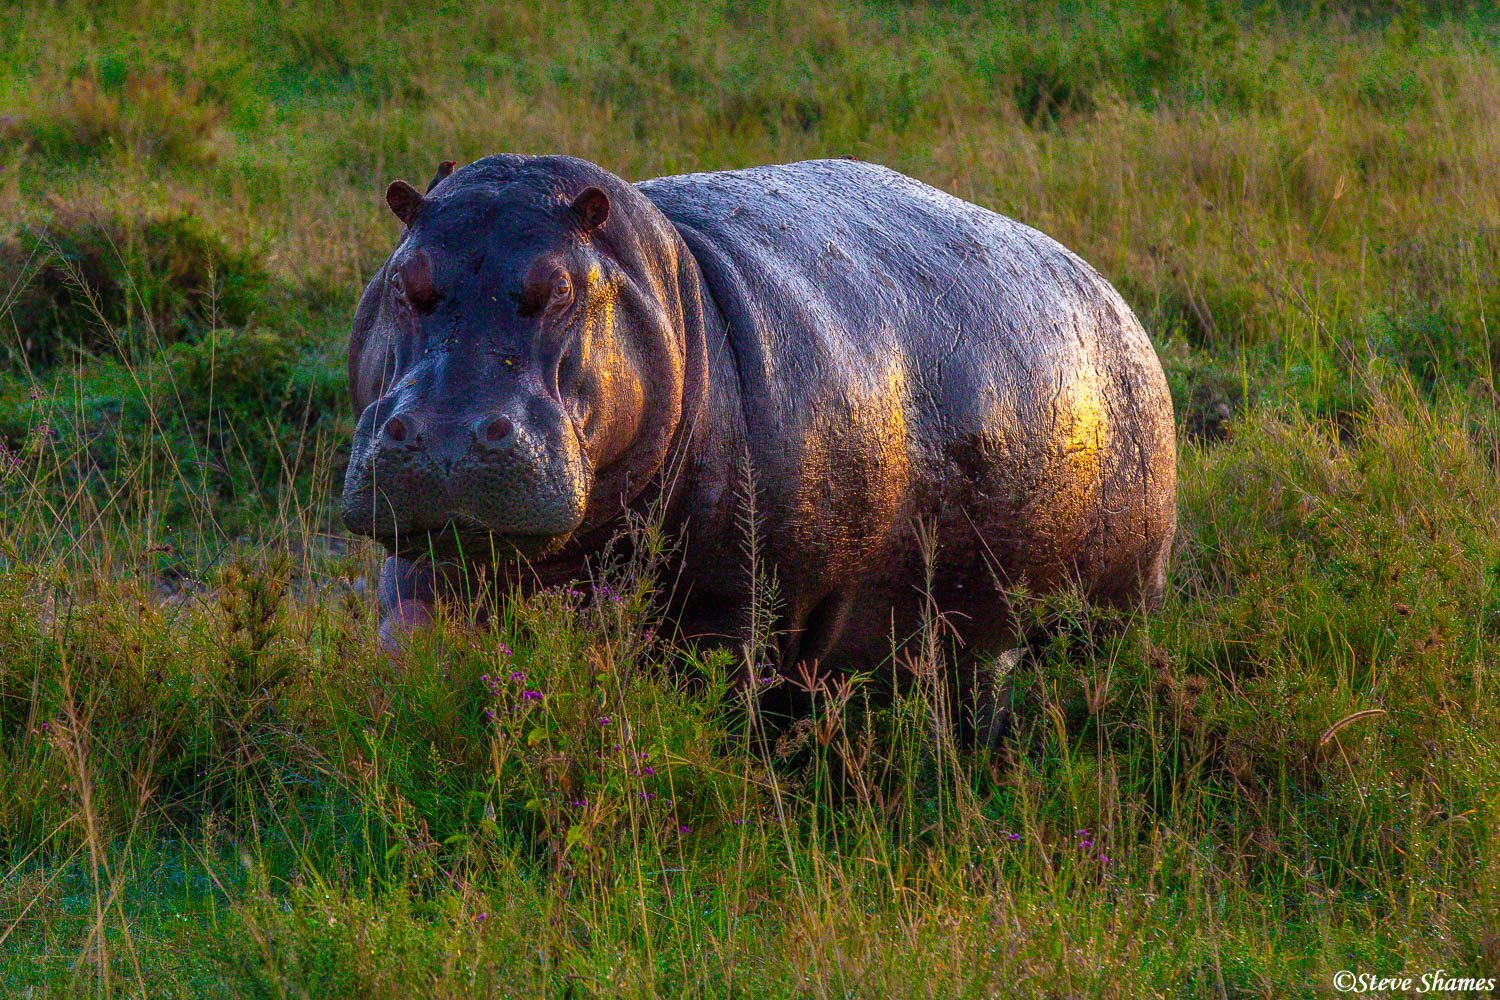 We saw this hippo out grazing just about sunrise, before they return to all day resting in the water.